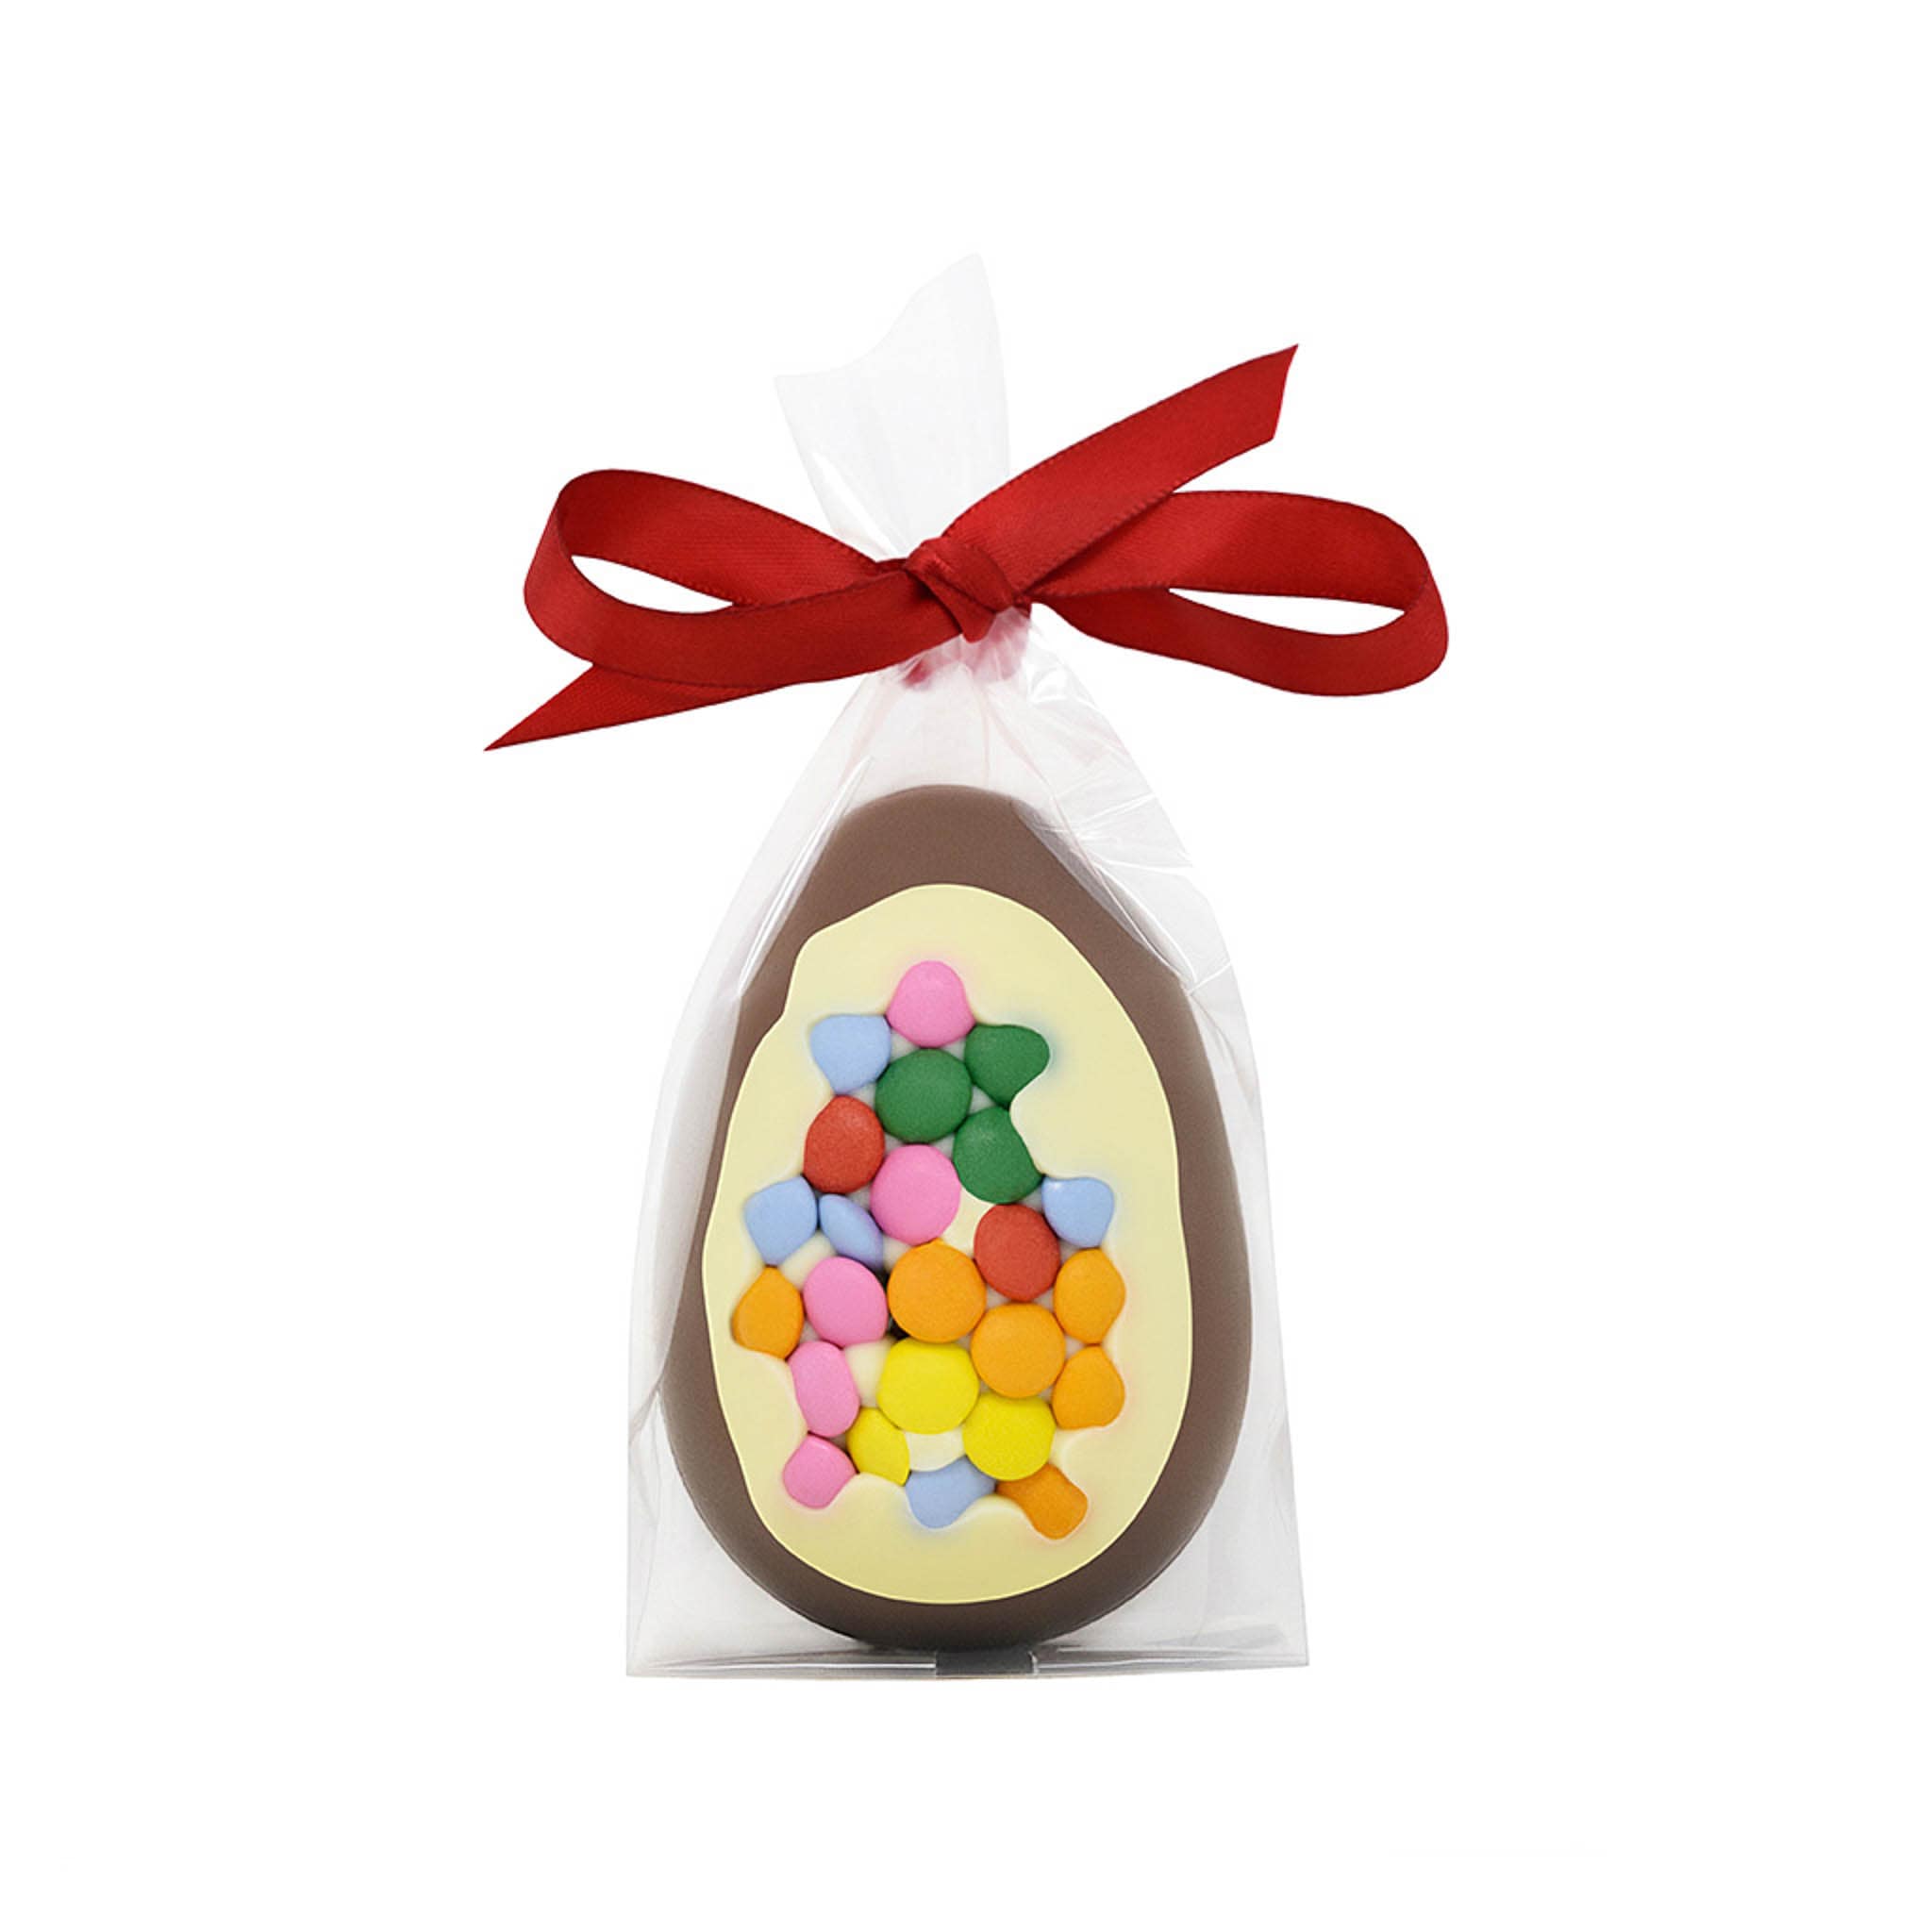 Cocoba Milk Chocolate Candy Coated Mini Easter Egg, 40g